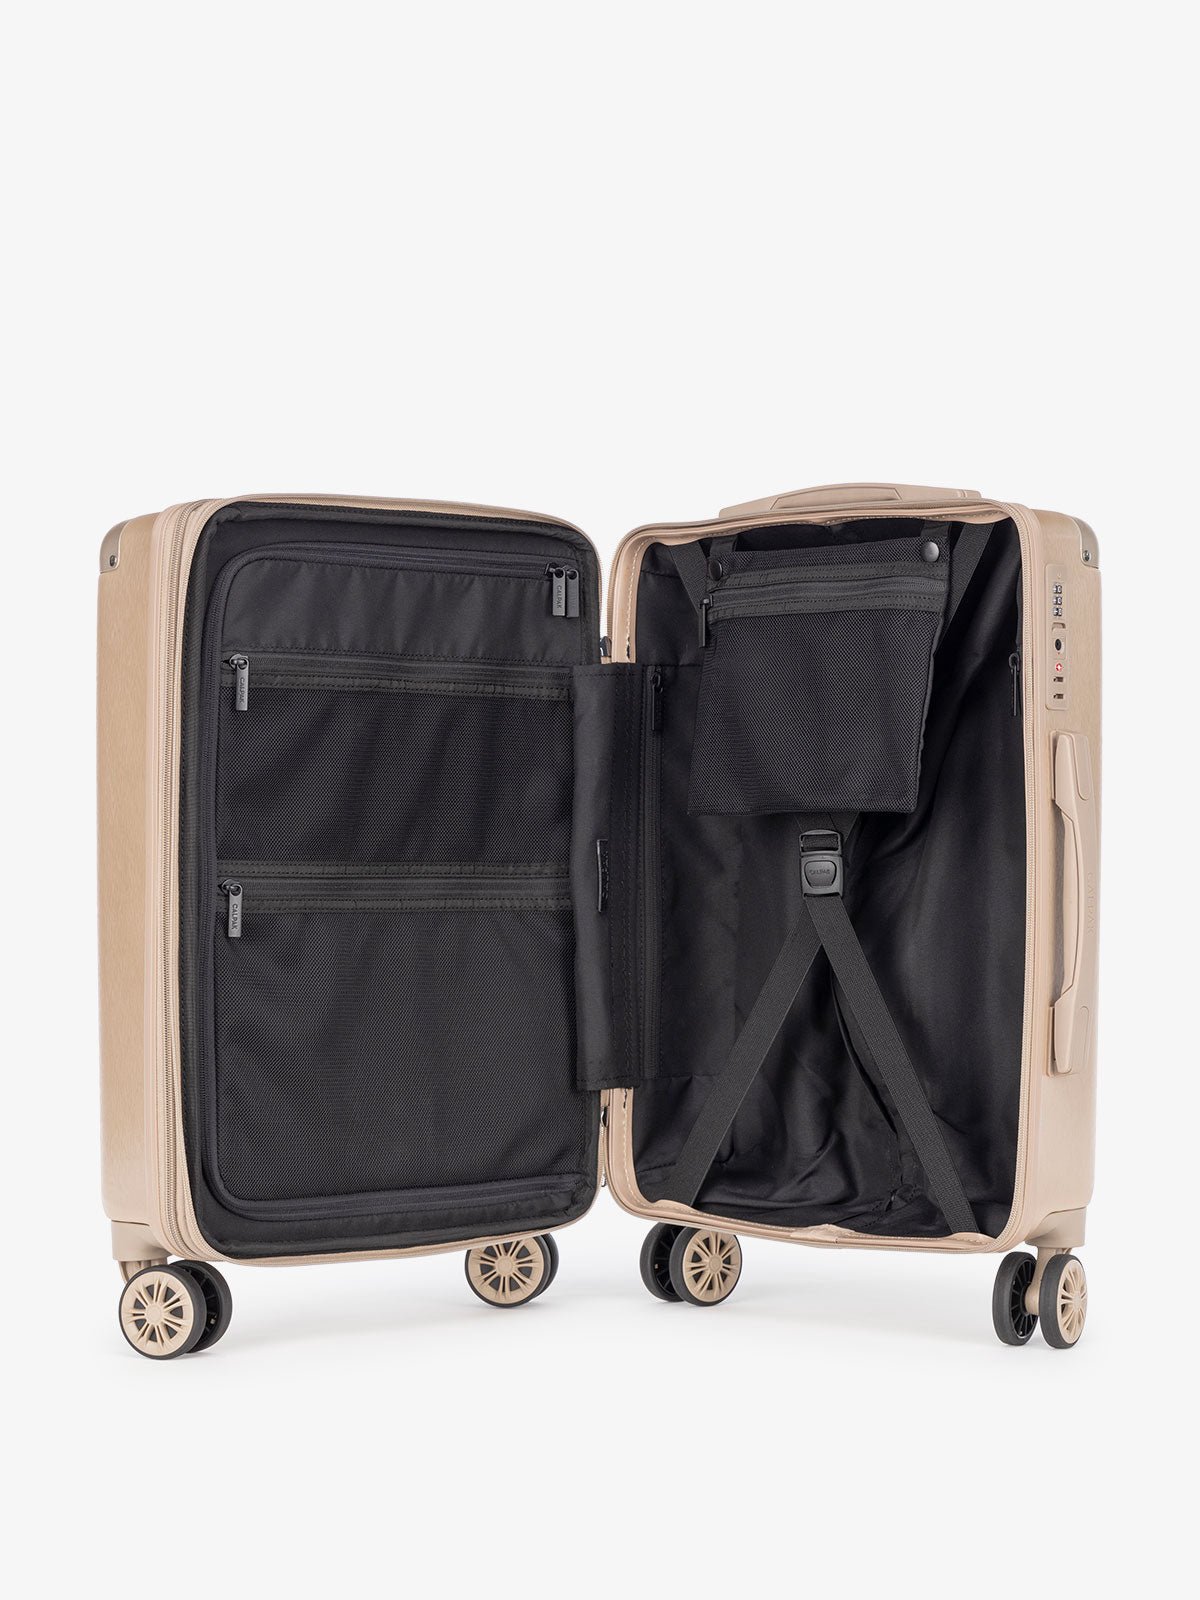 CALPAK Ambeur gold large 30 inch luggage with compression straps